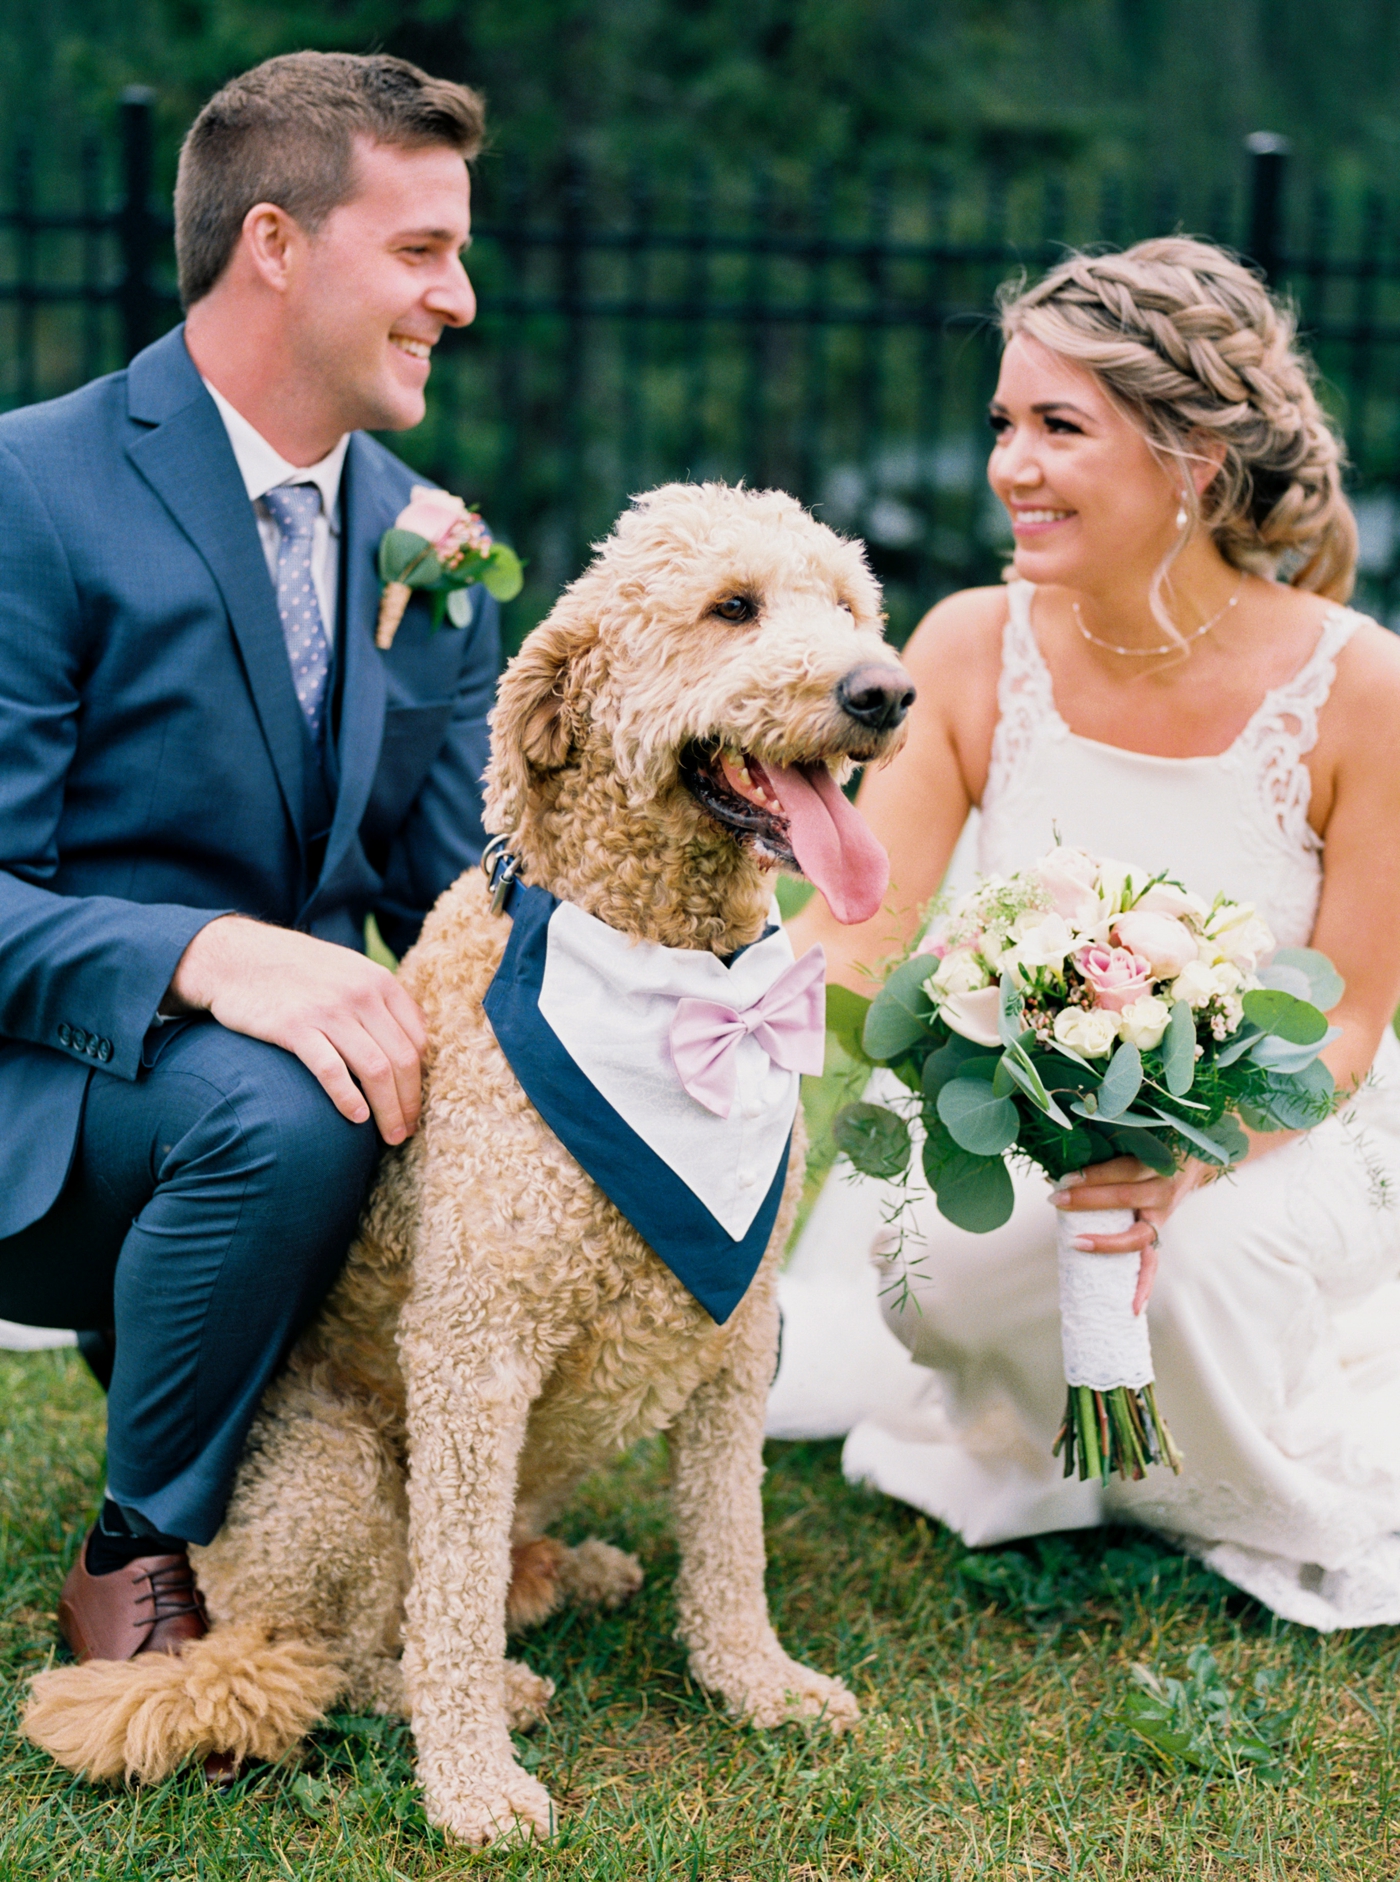 Bride and groom with goldendoodle dog with pink bow tie tuxedo collar